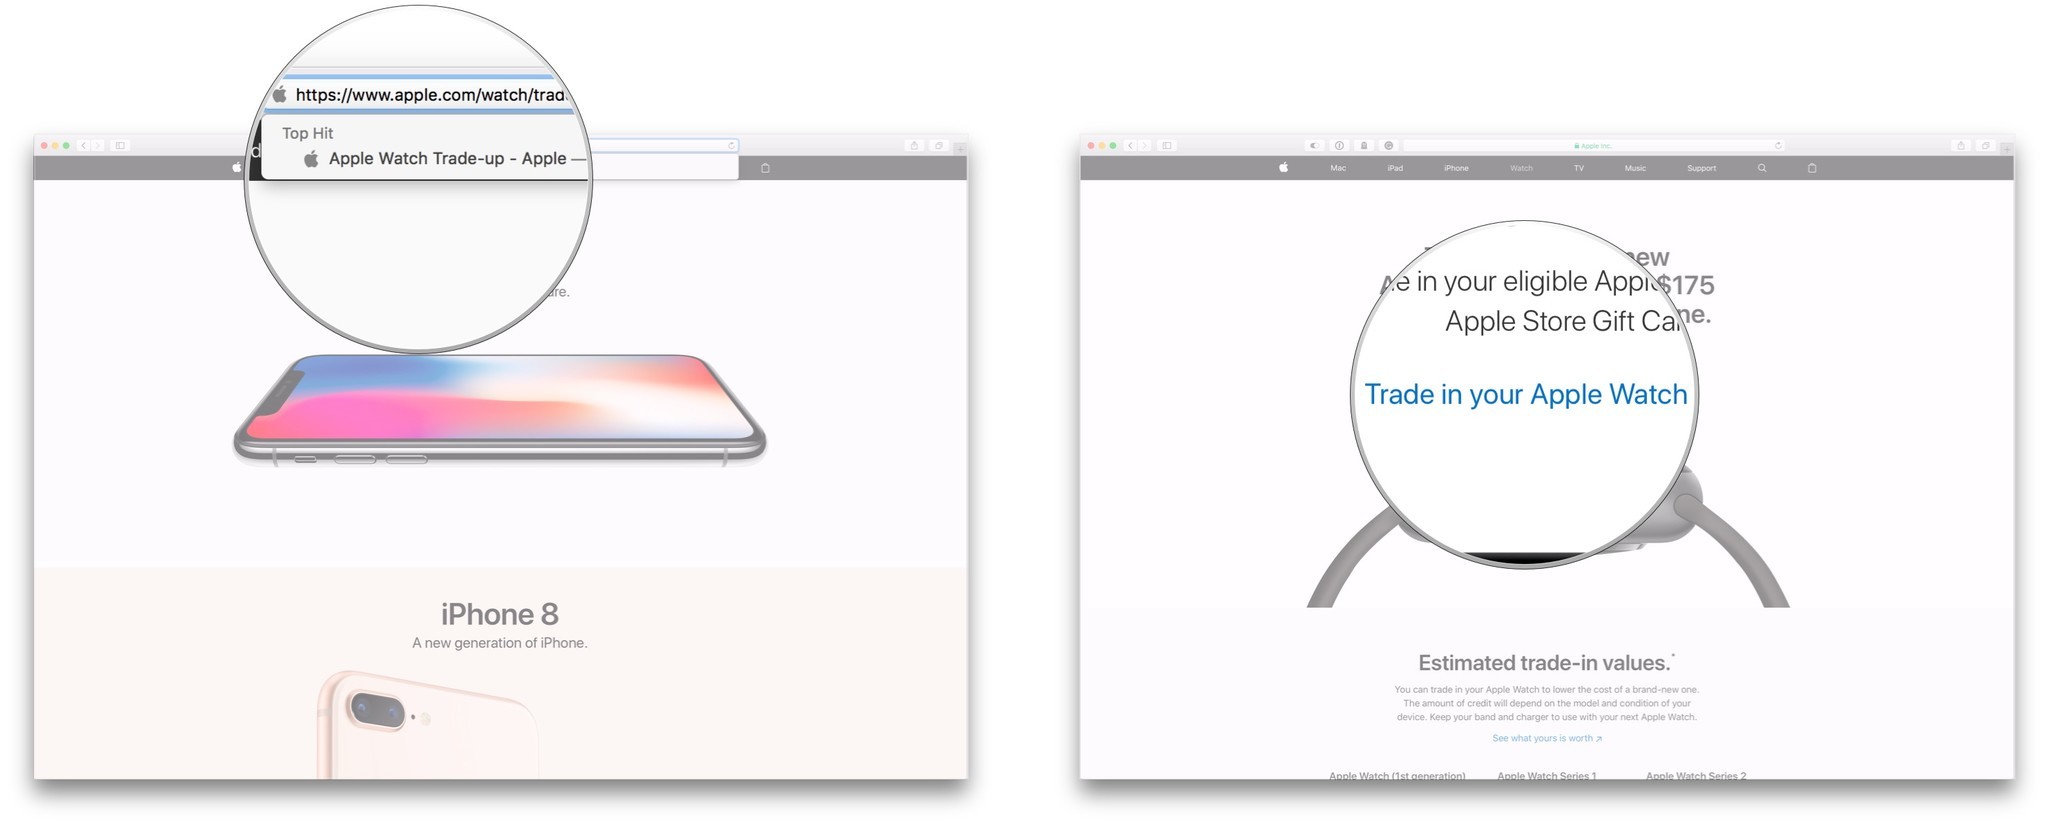 Go to Apple Watch Trade Up site, click Trade in your Apple Watch online